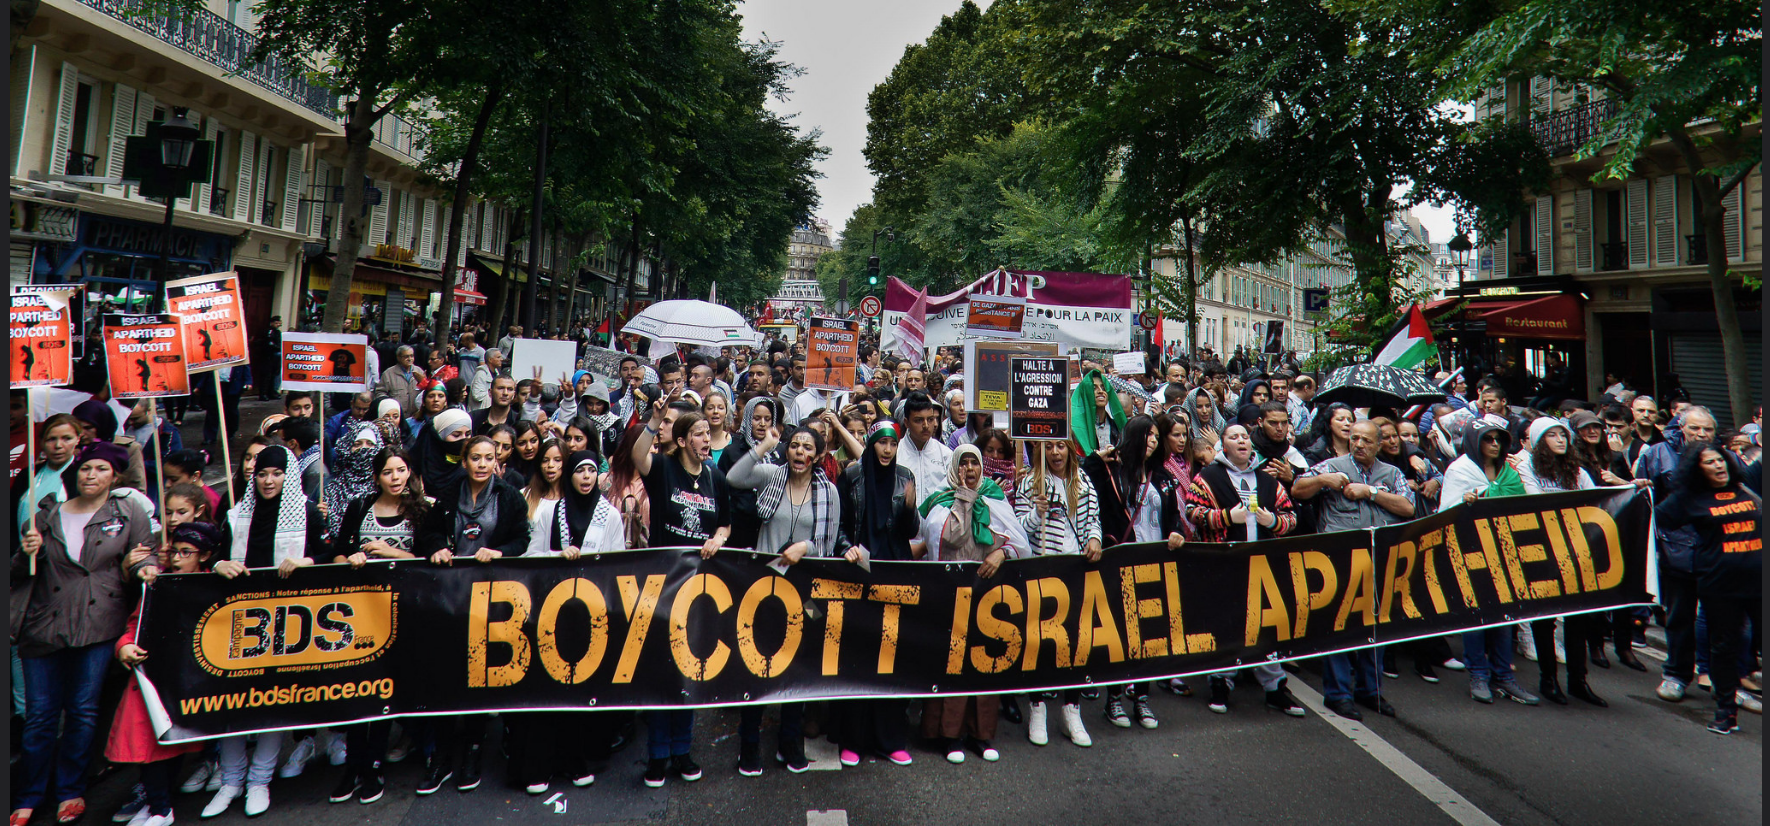 No Thanks' app calls for boycott of Israel-related products